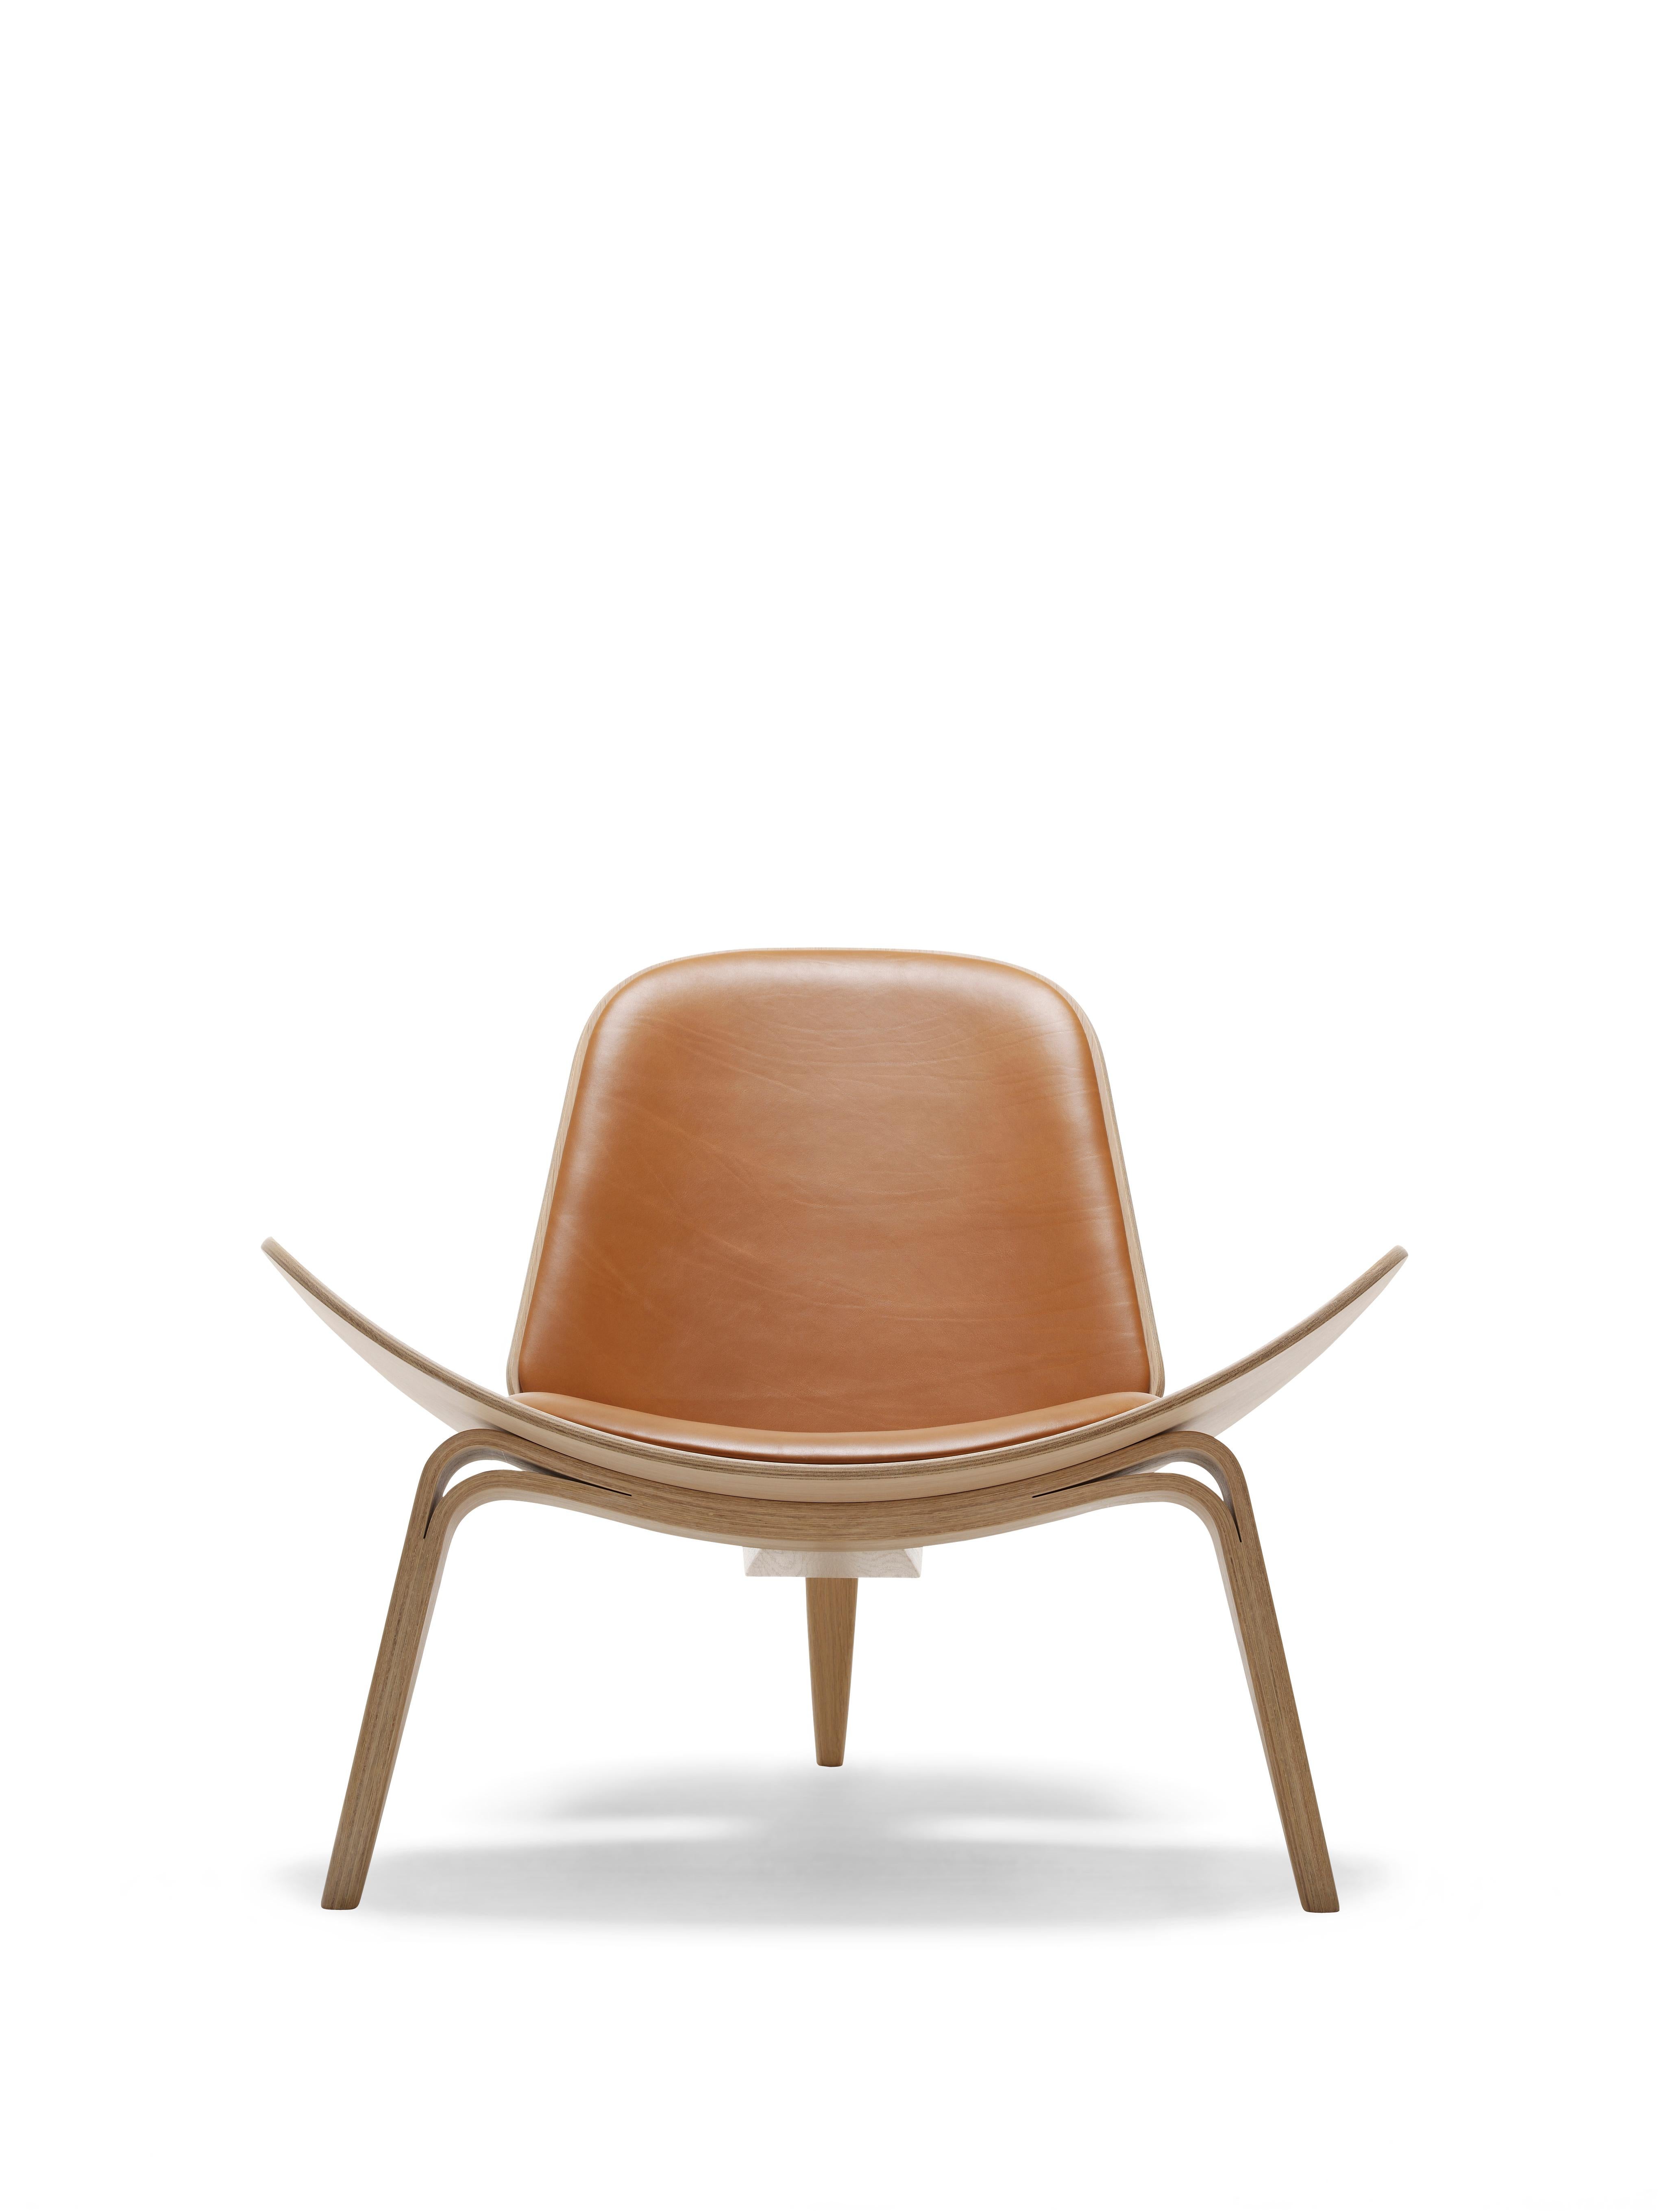 Brown (Sif 91) CH07 Shell Chair in Oak White Oil with Leather Seat by Hans J. Wegner